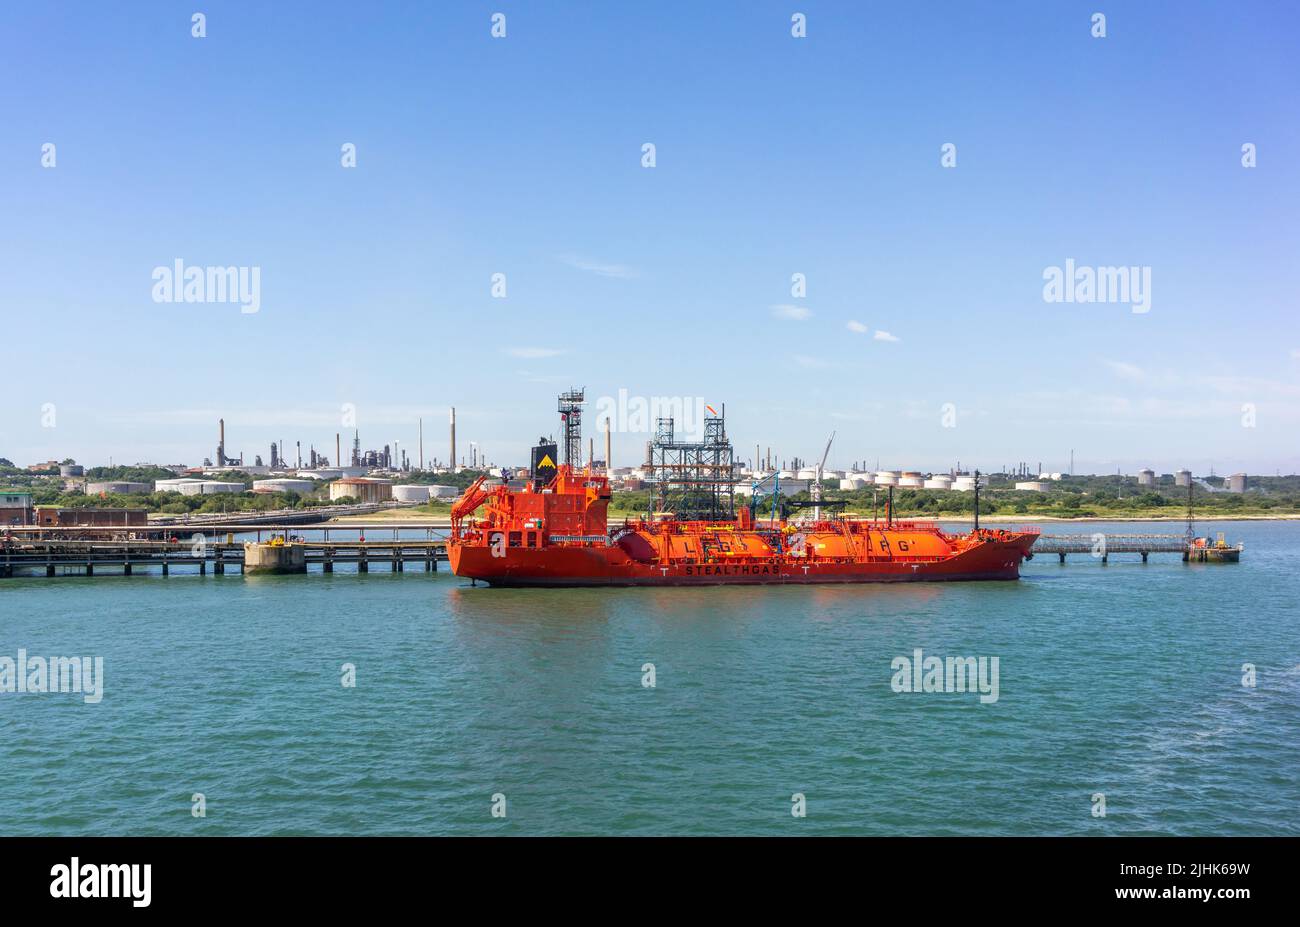 LPG Stealthgas tanker moored at Fawley Refinery Oil terminal, Fawley, Hampshire, England, UK Stock Photo